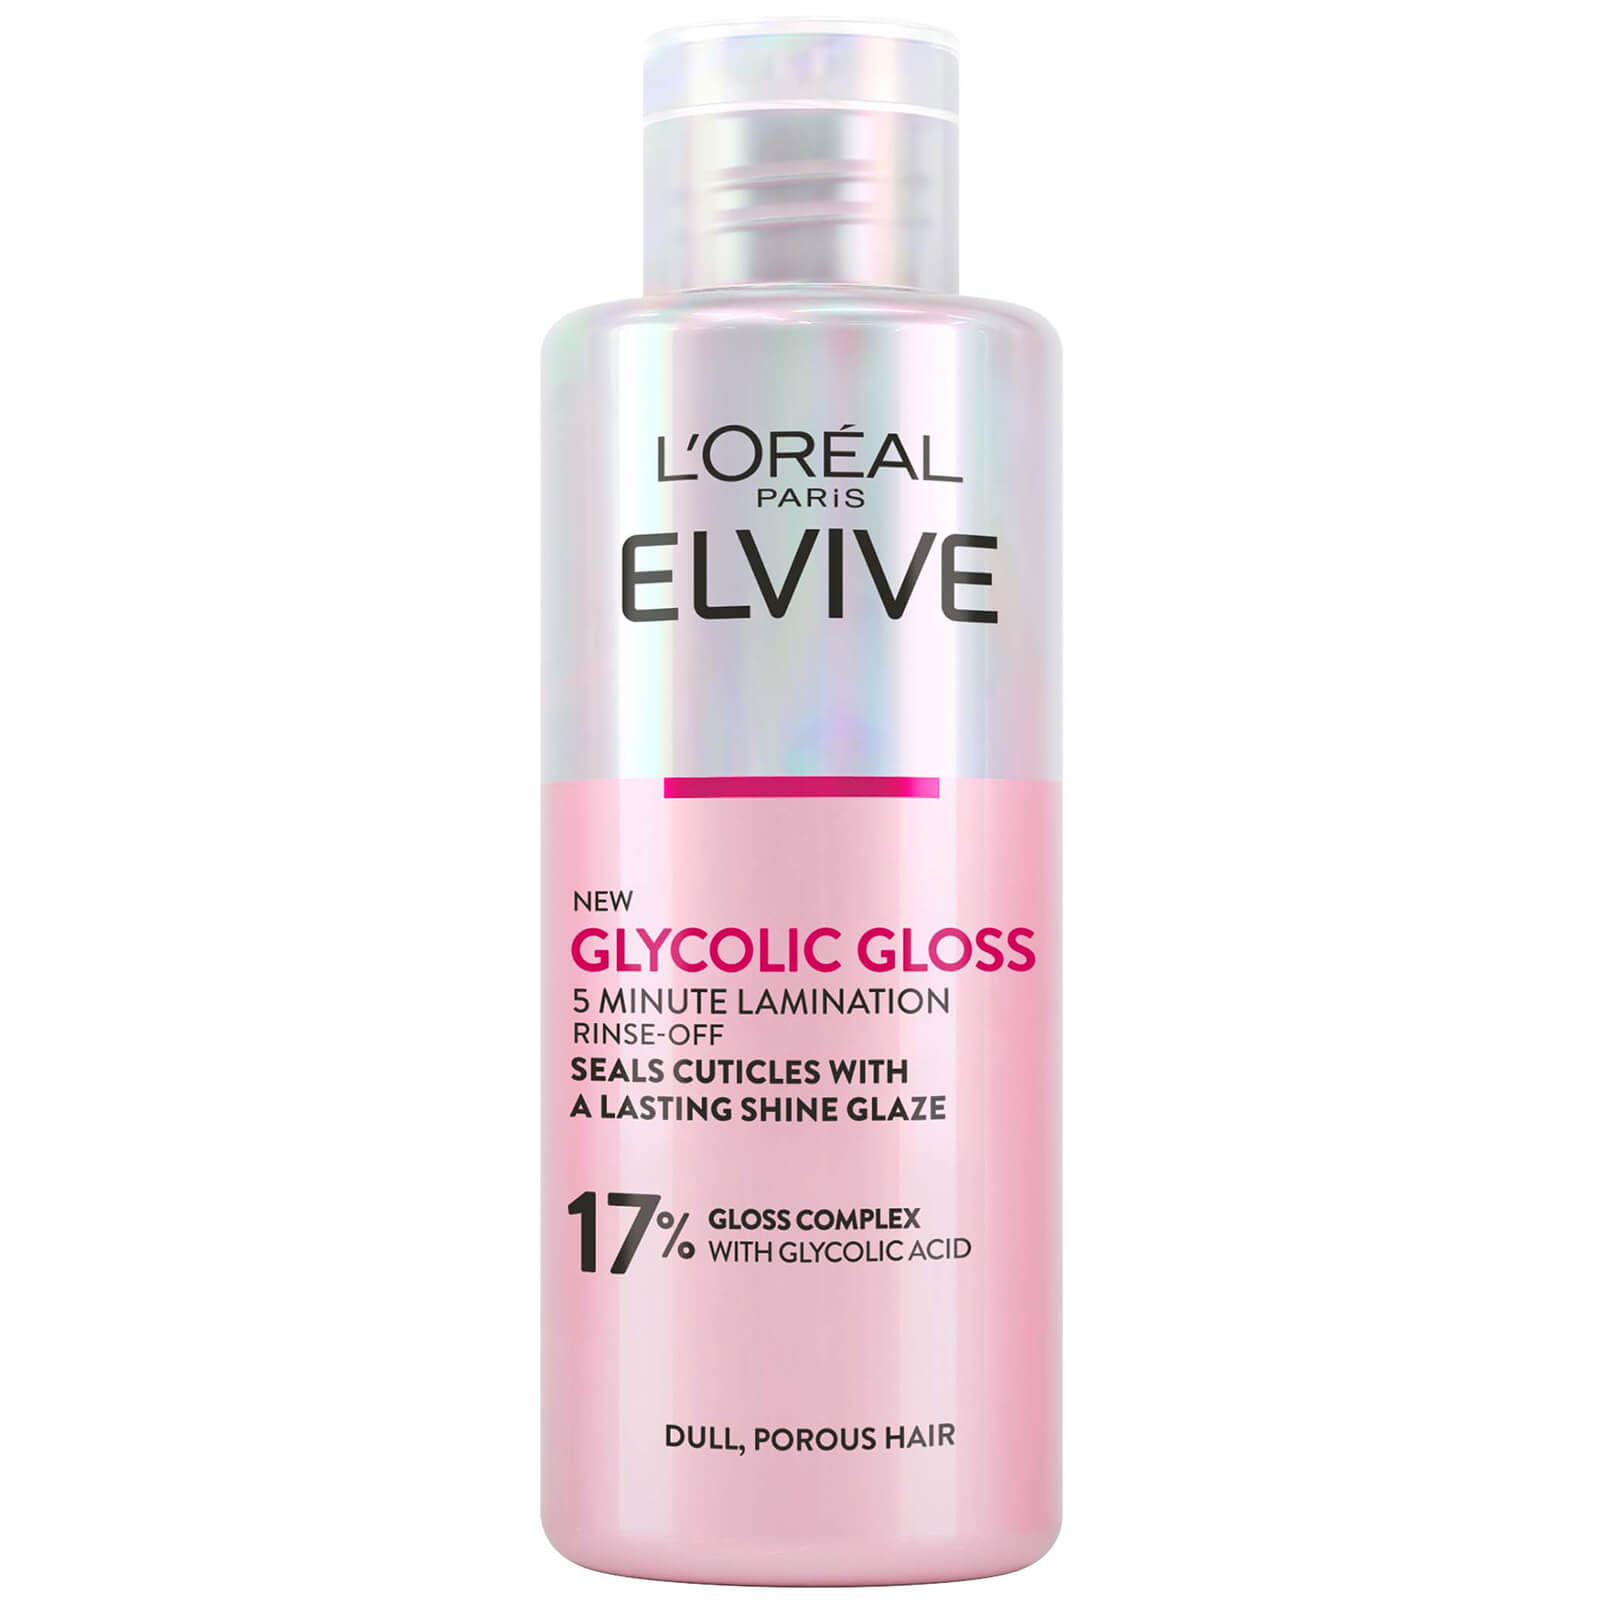 L'oréal Paris Elvive Glycolic Gloss Rinse-off 5 Minute Lamination Treatment For Dull Hair 150ml In White